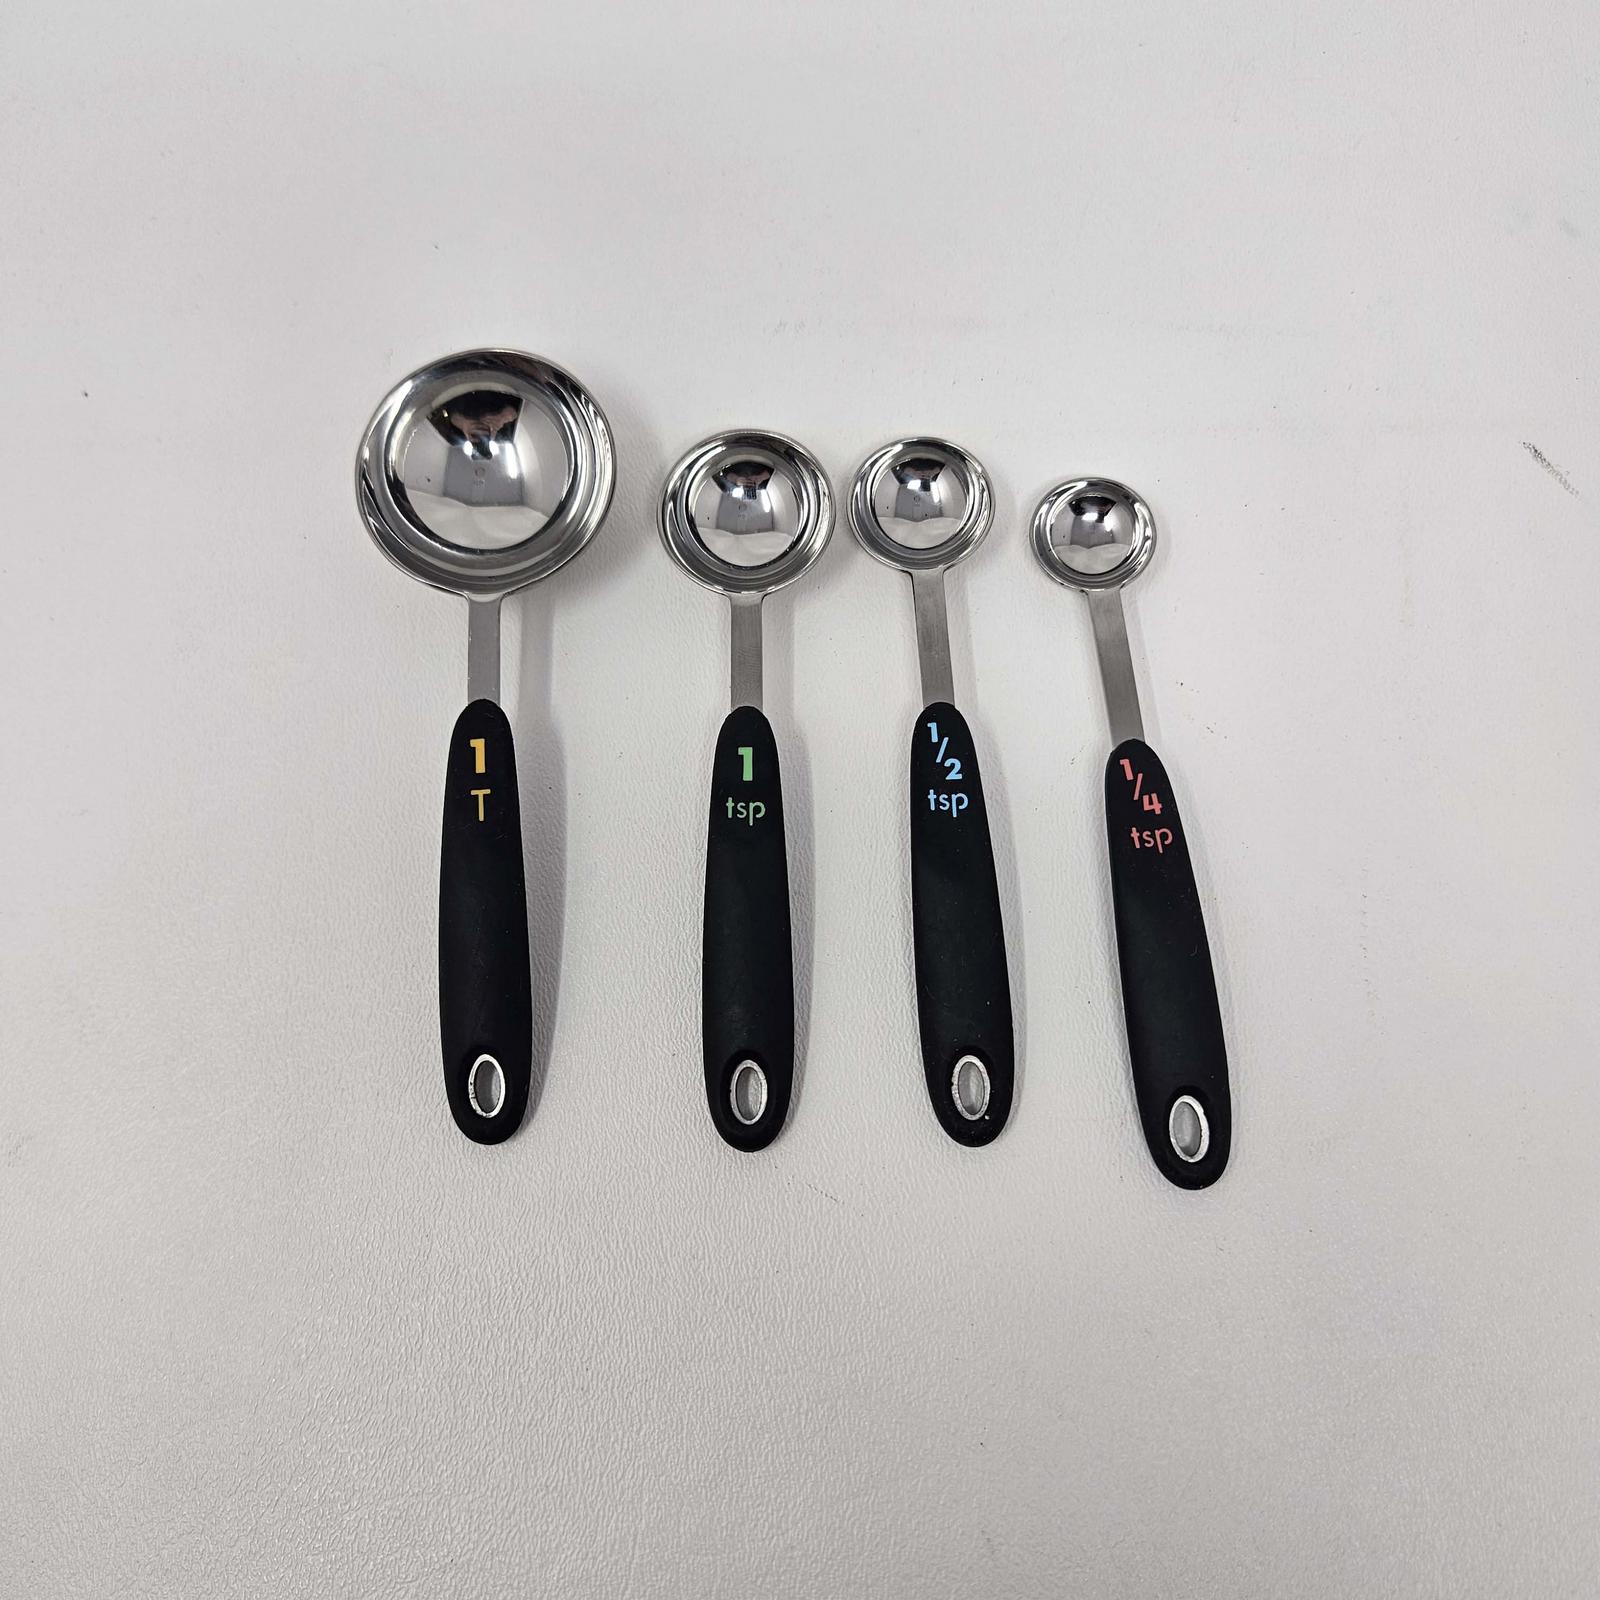 OXO Black Handle Stainless Steel Measuring Spoons Set of 4 #1